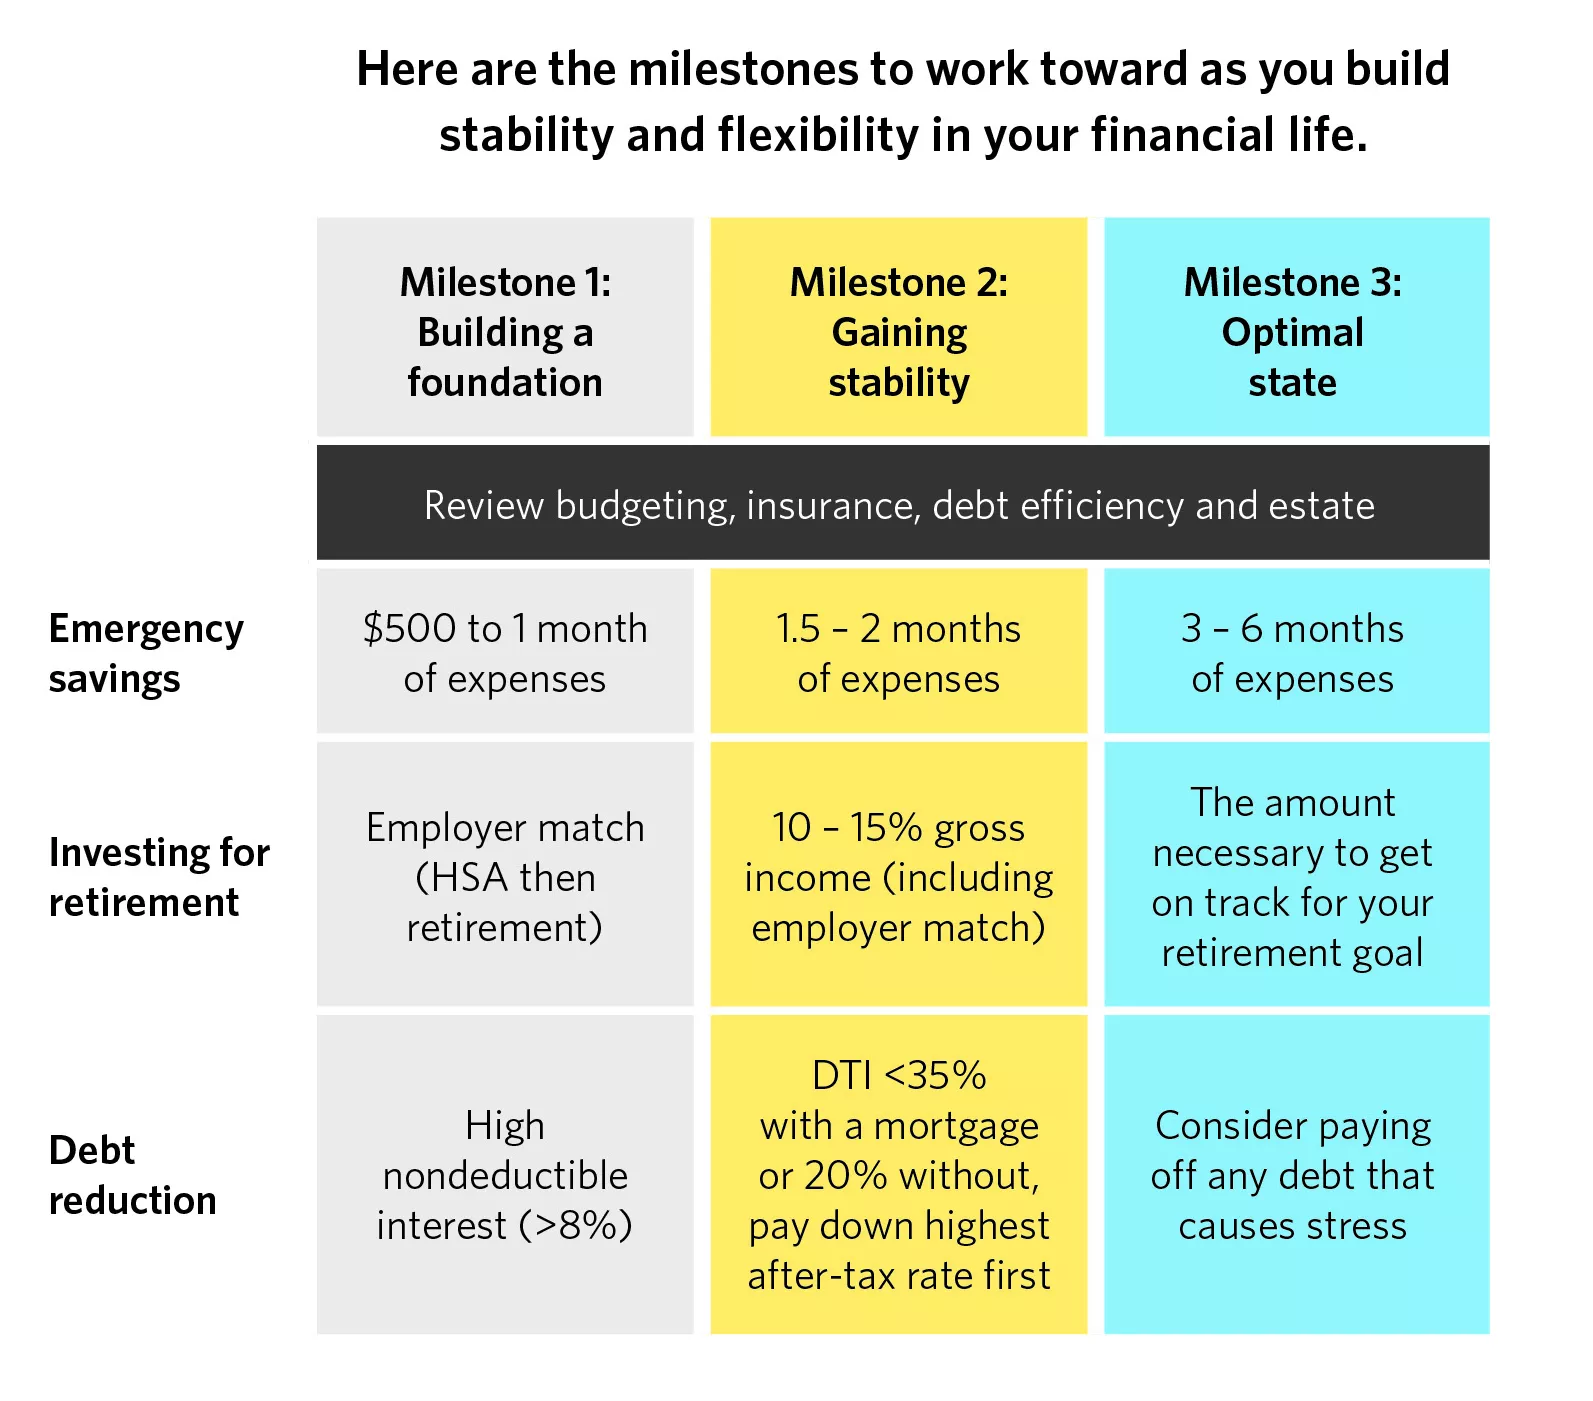  Milestones to work toward building financial stability and flexibility.
